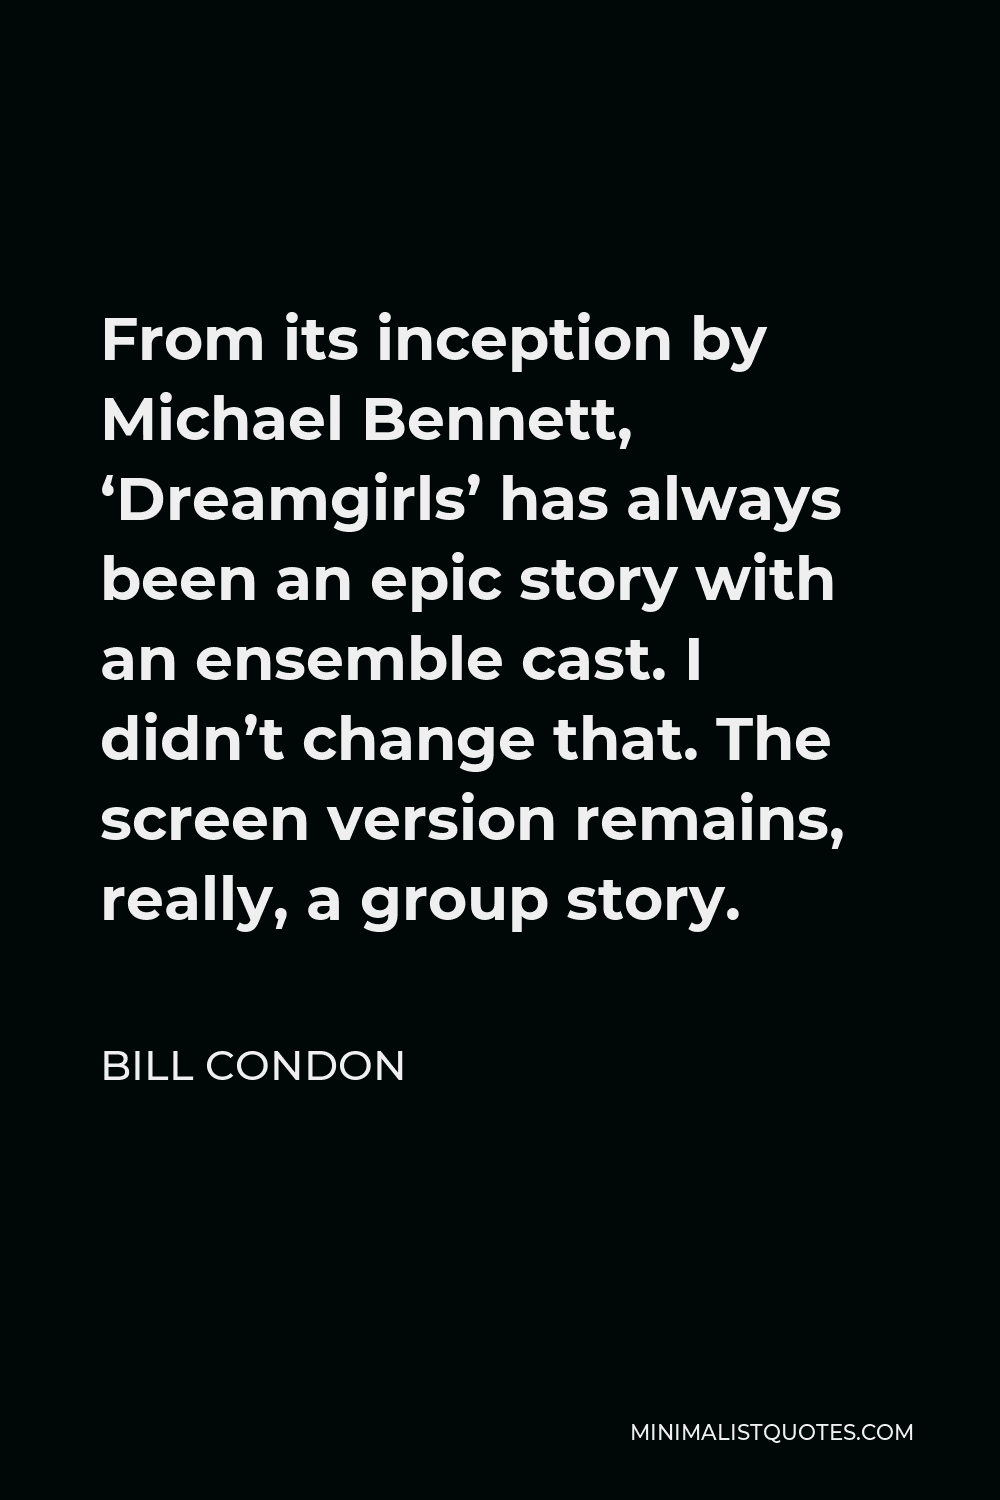 Bill Condon Quote - From its inception by Michael Bennett, ‘Dreamgirls’ has always been an epic story with an ensemble cast. I didn’t change that. The screen version remains, really, a group story.